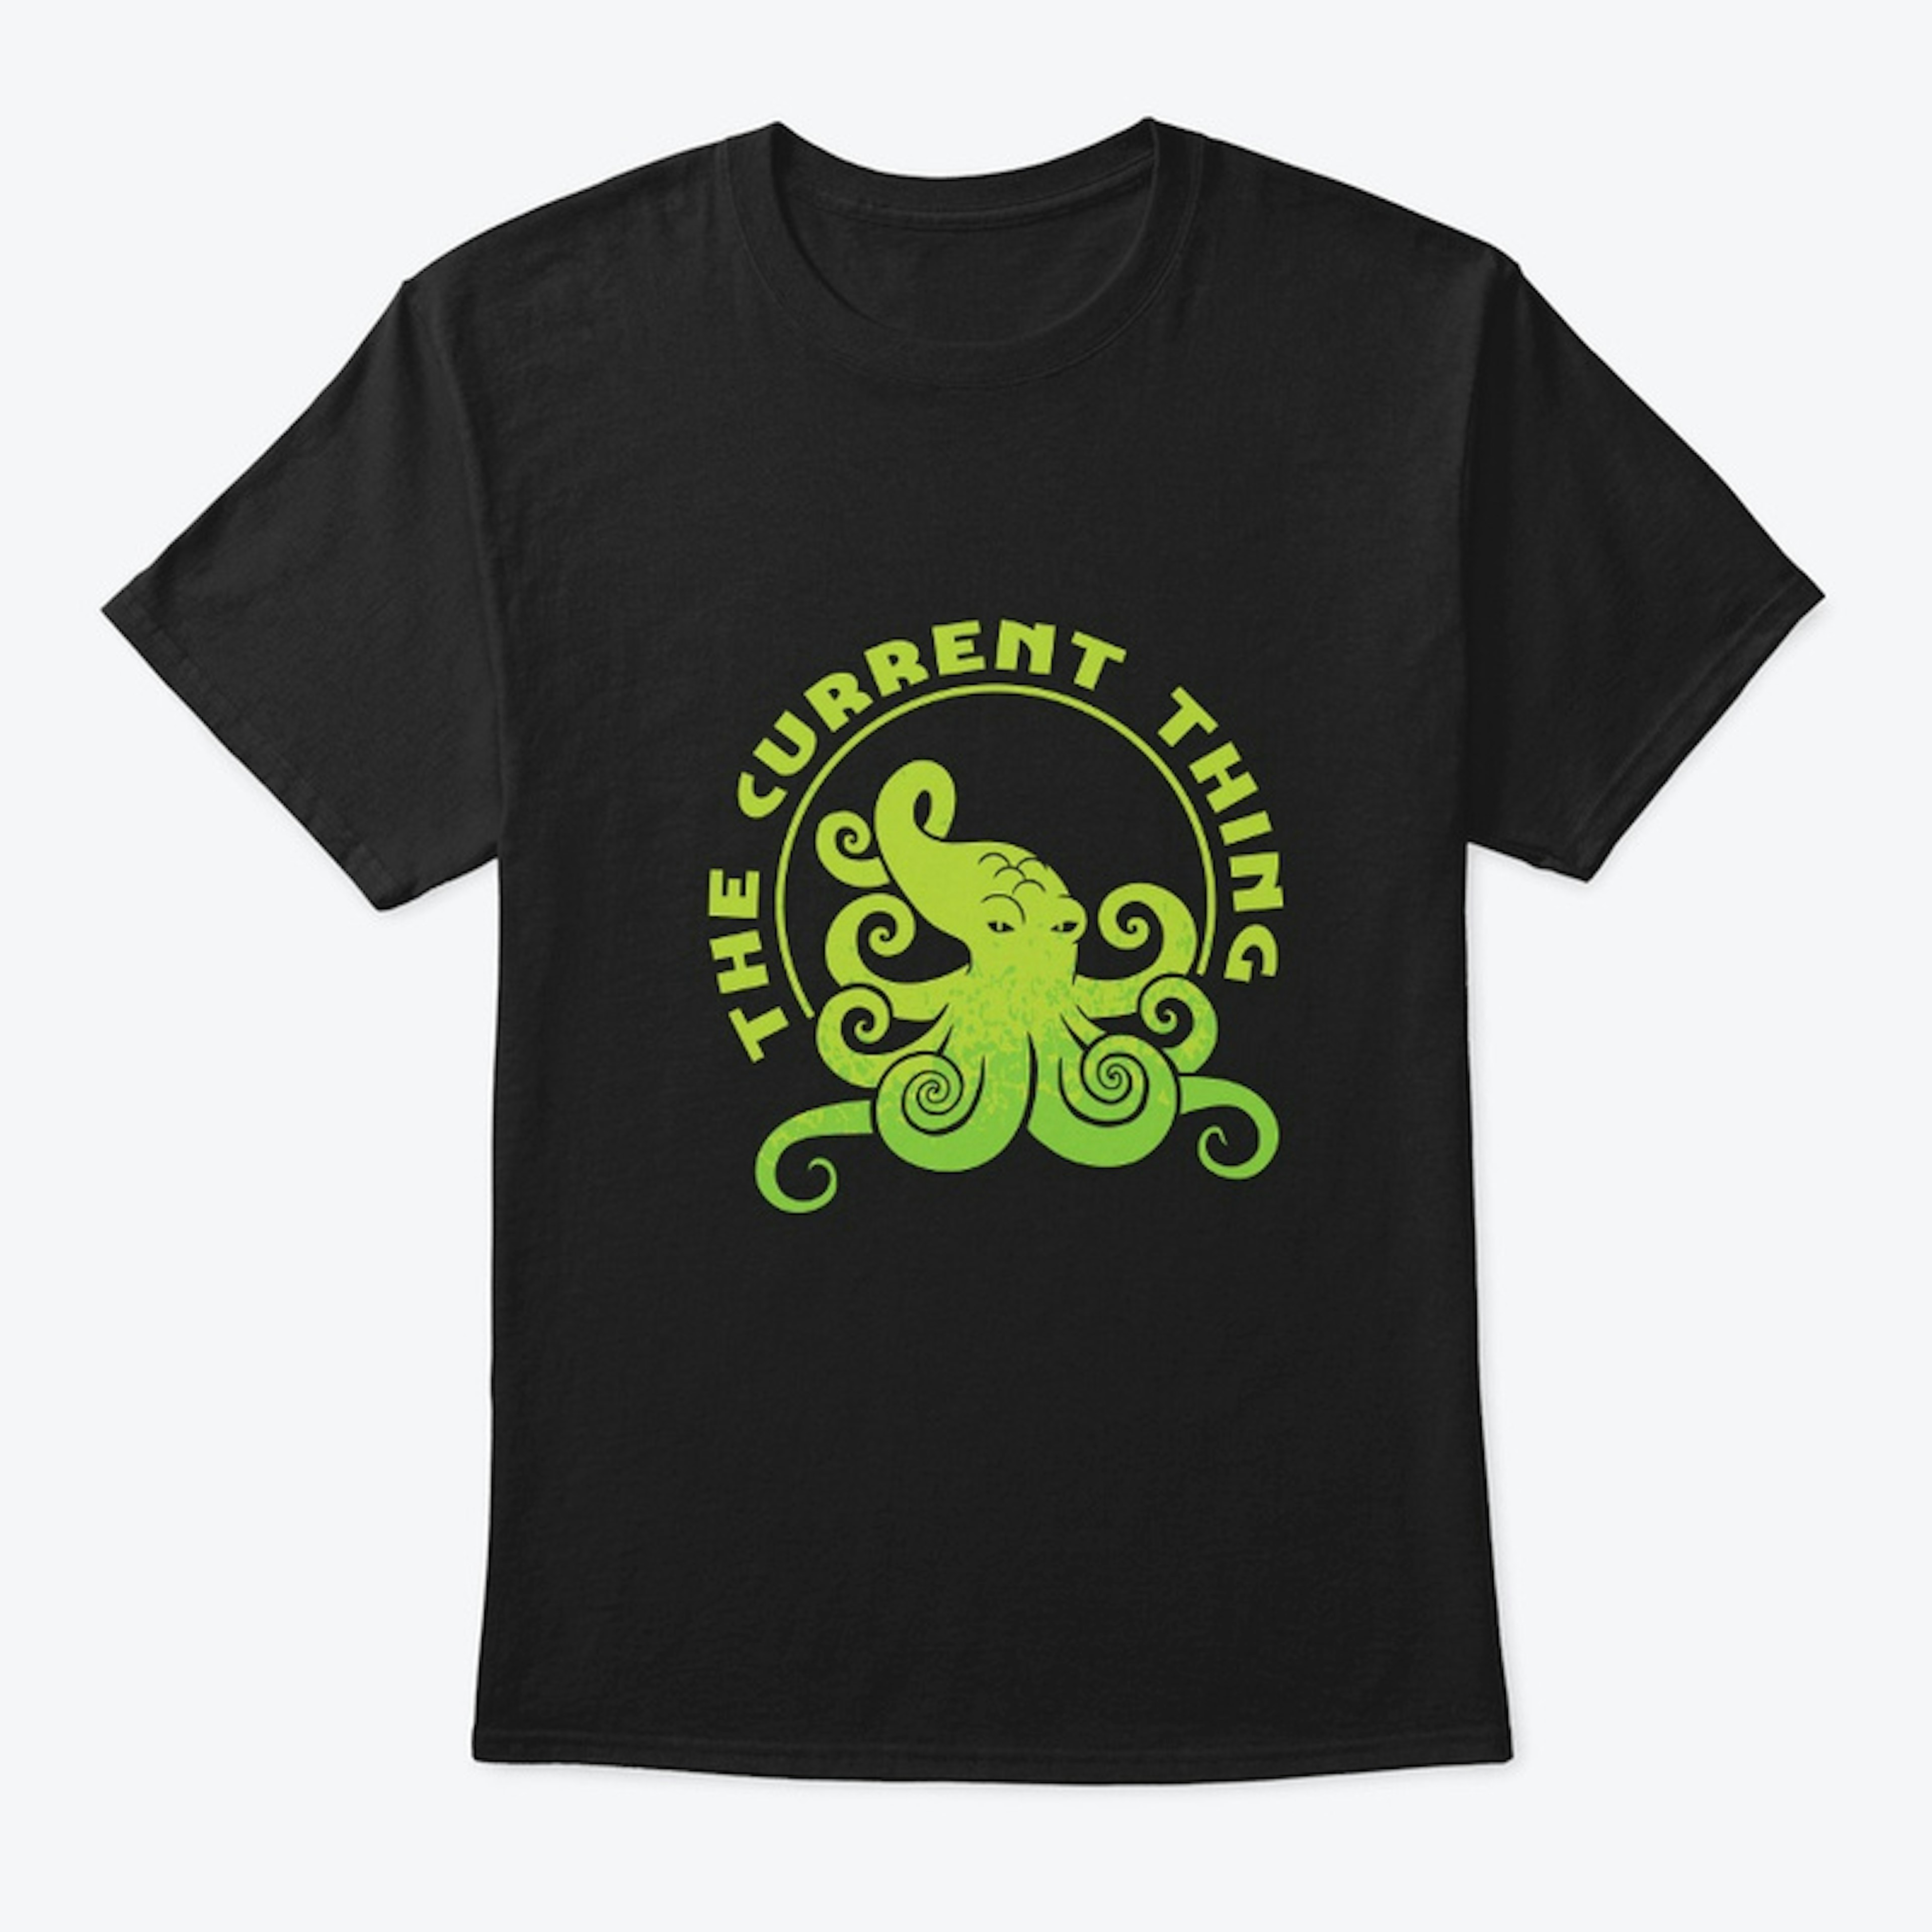 The current thing T-shirt